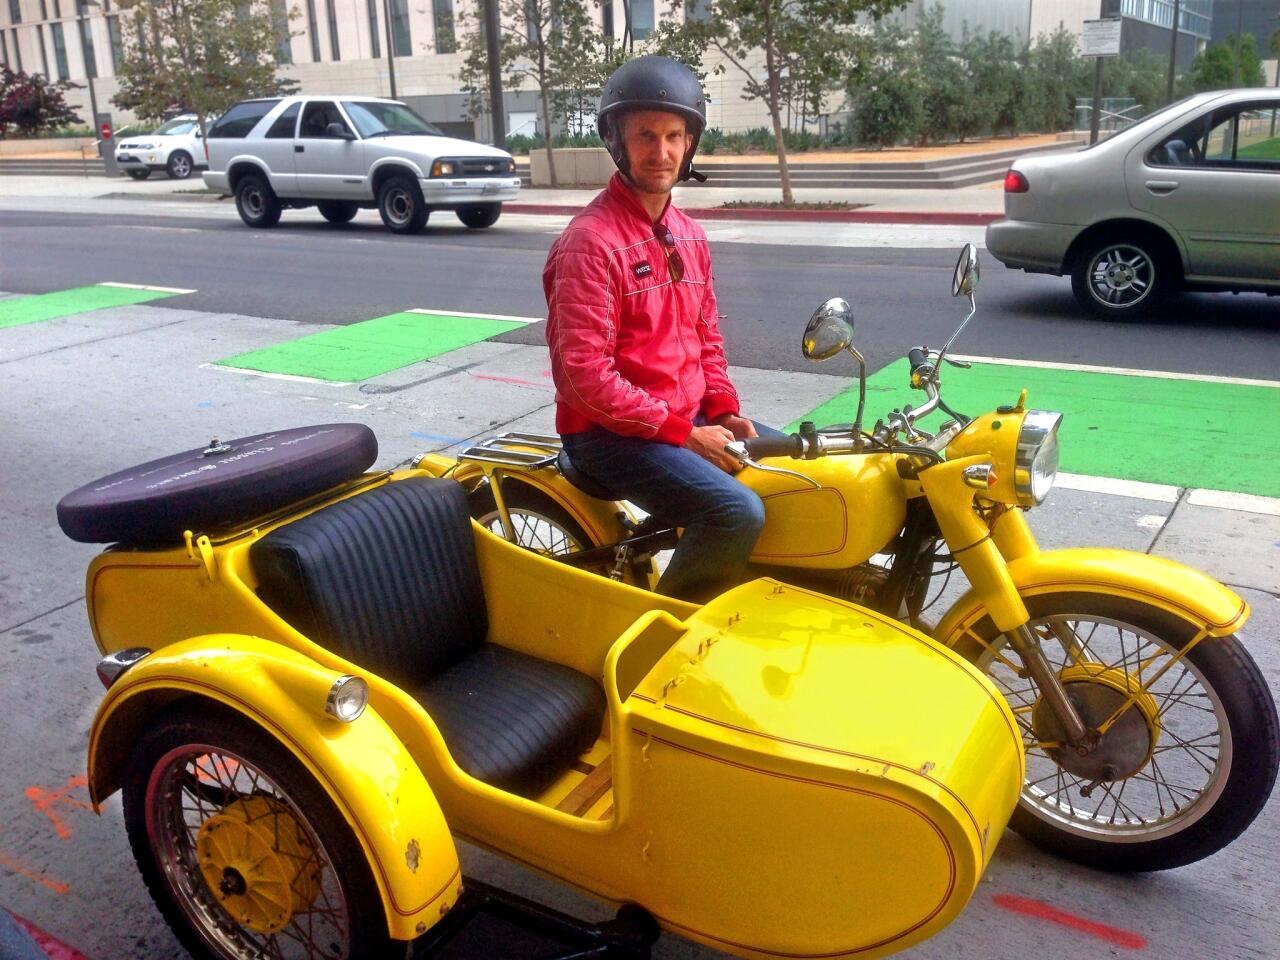 Logothetis sets out from Los Angeles with his 1978 Chang Jiang motorcycle.